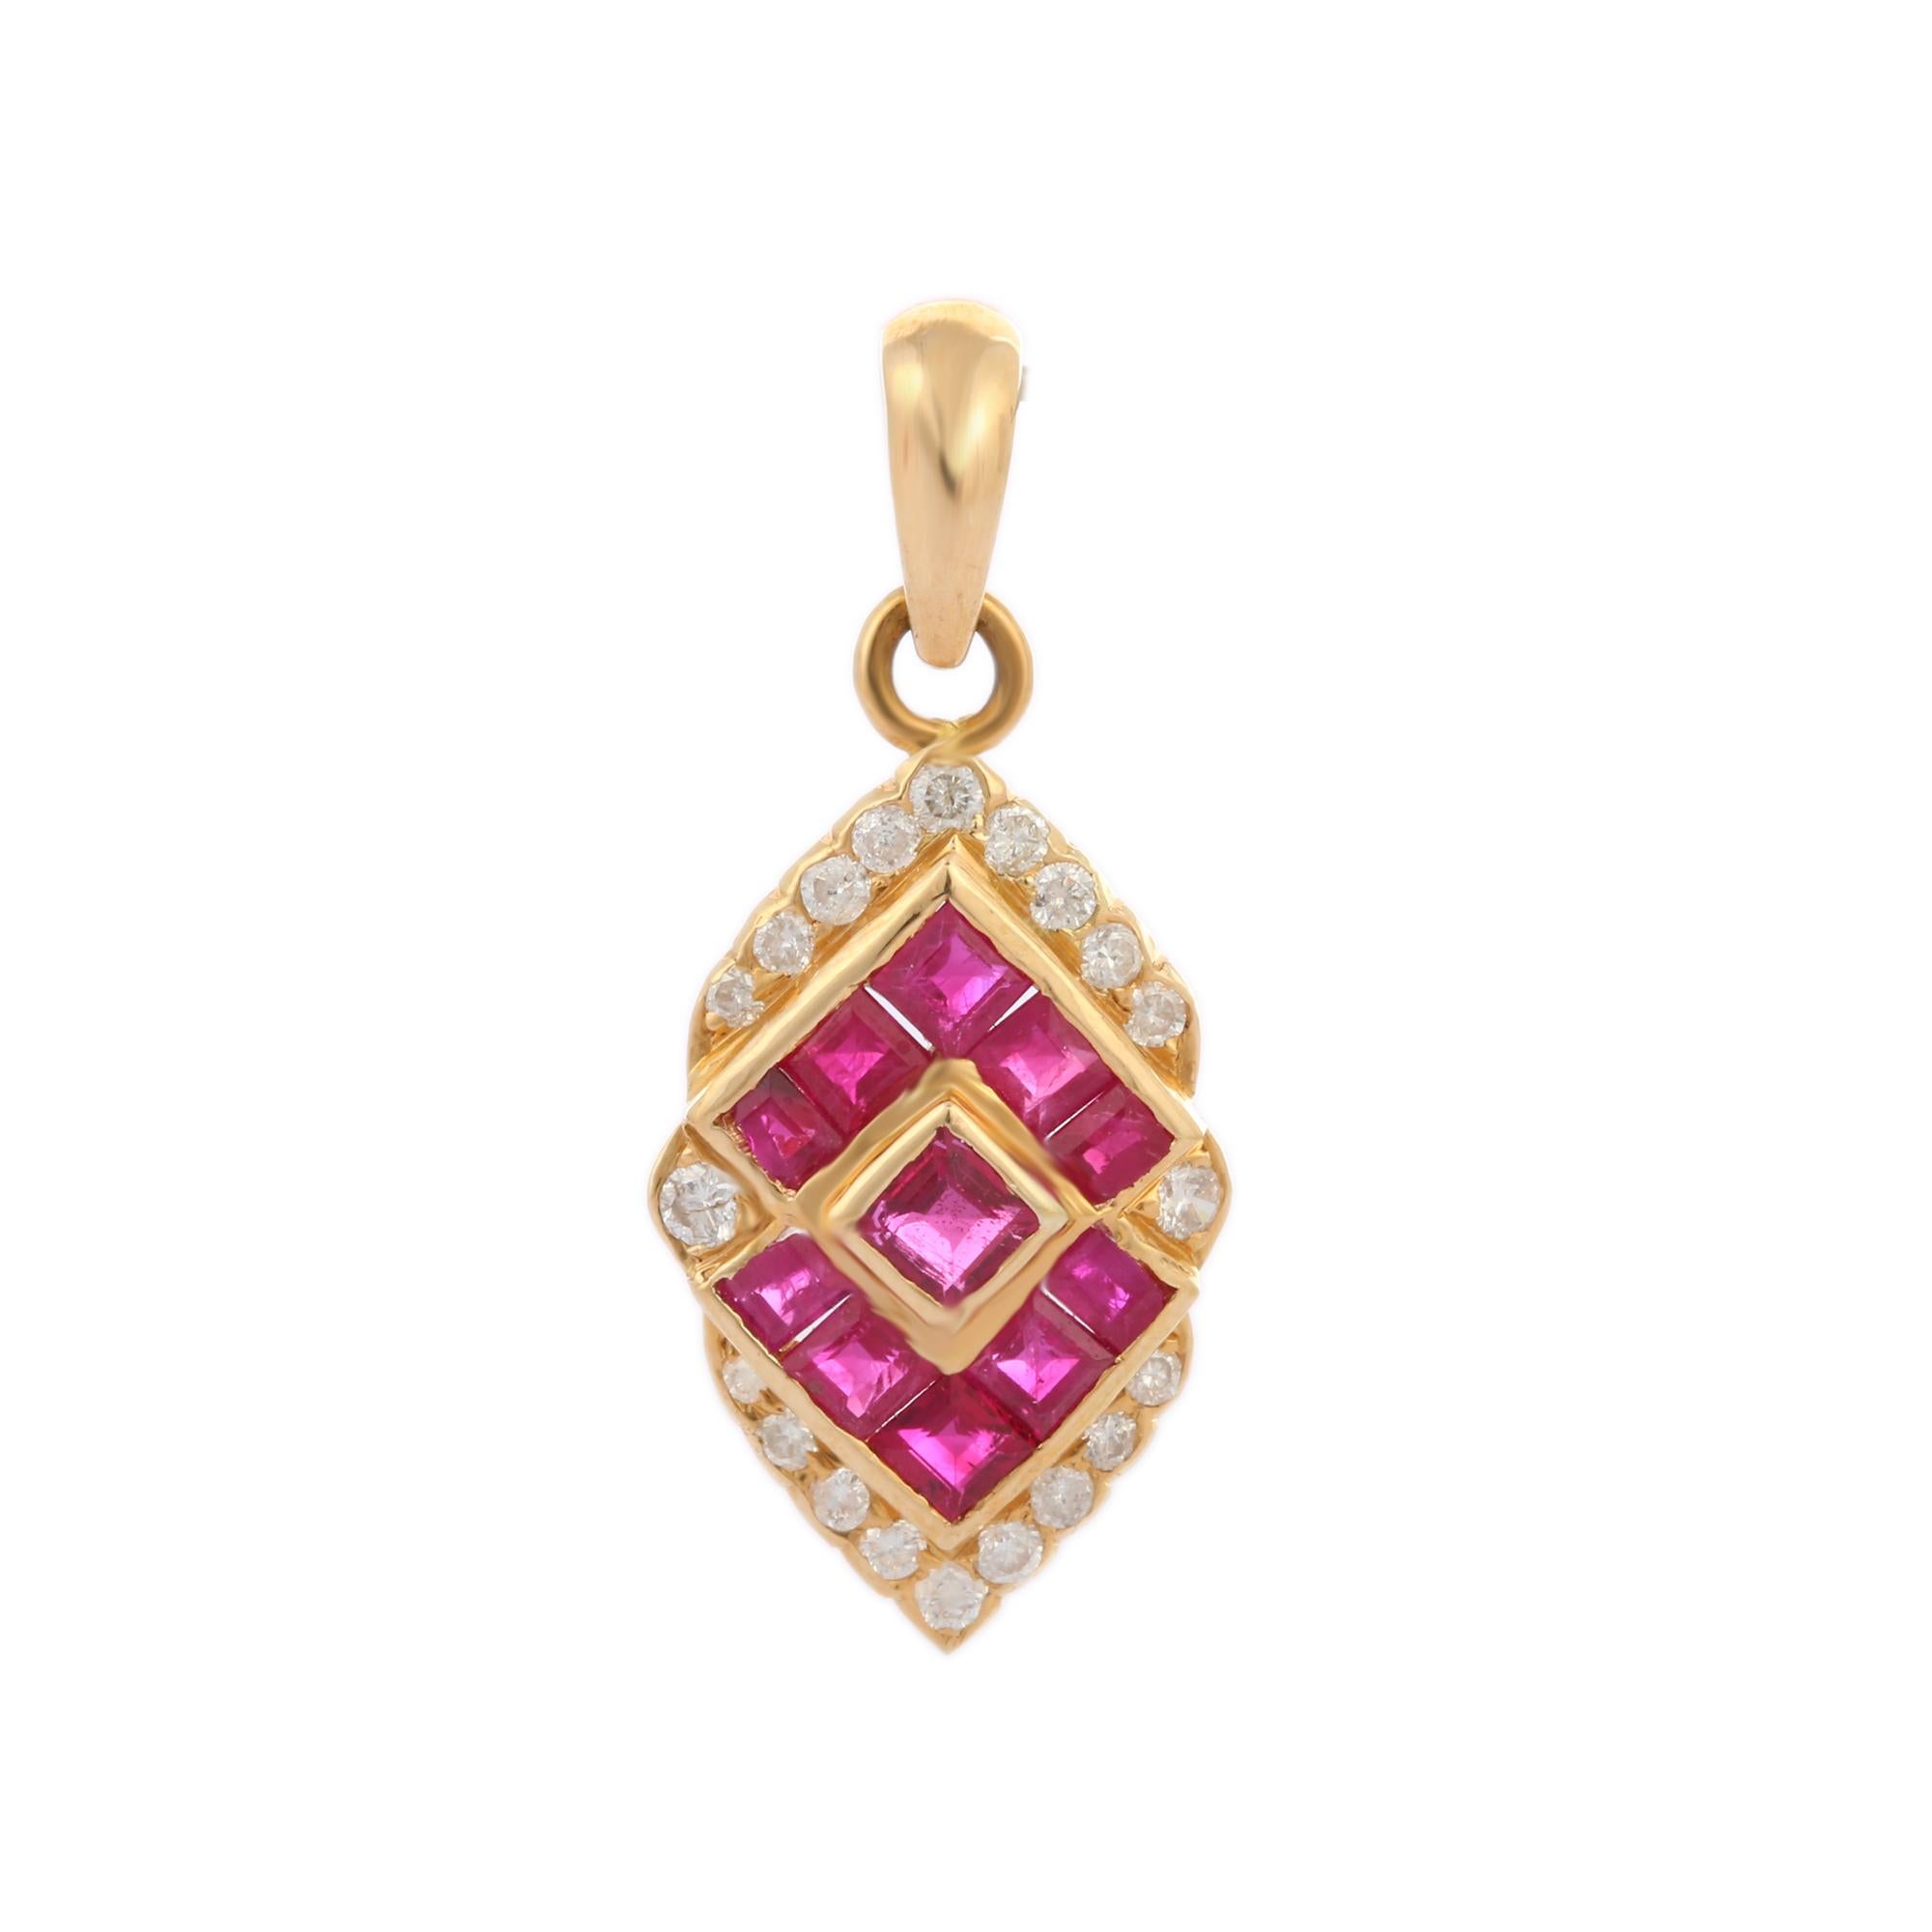 Ruby Diamond Pendant in 18K Gold. It has a square cut ruby studded with diamonds that completes your look with a decent touch. Pendants are used to wear or gifted to represent love and promises. It's an attractive jewelry piece that goes with every